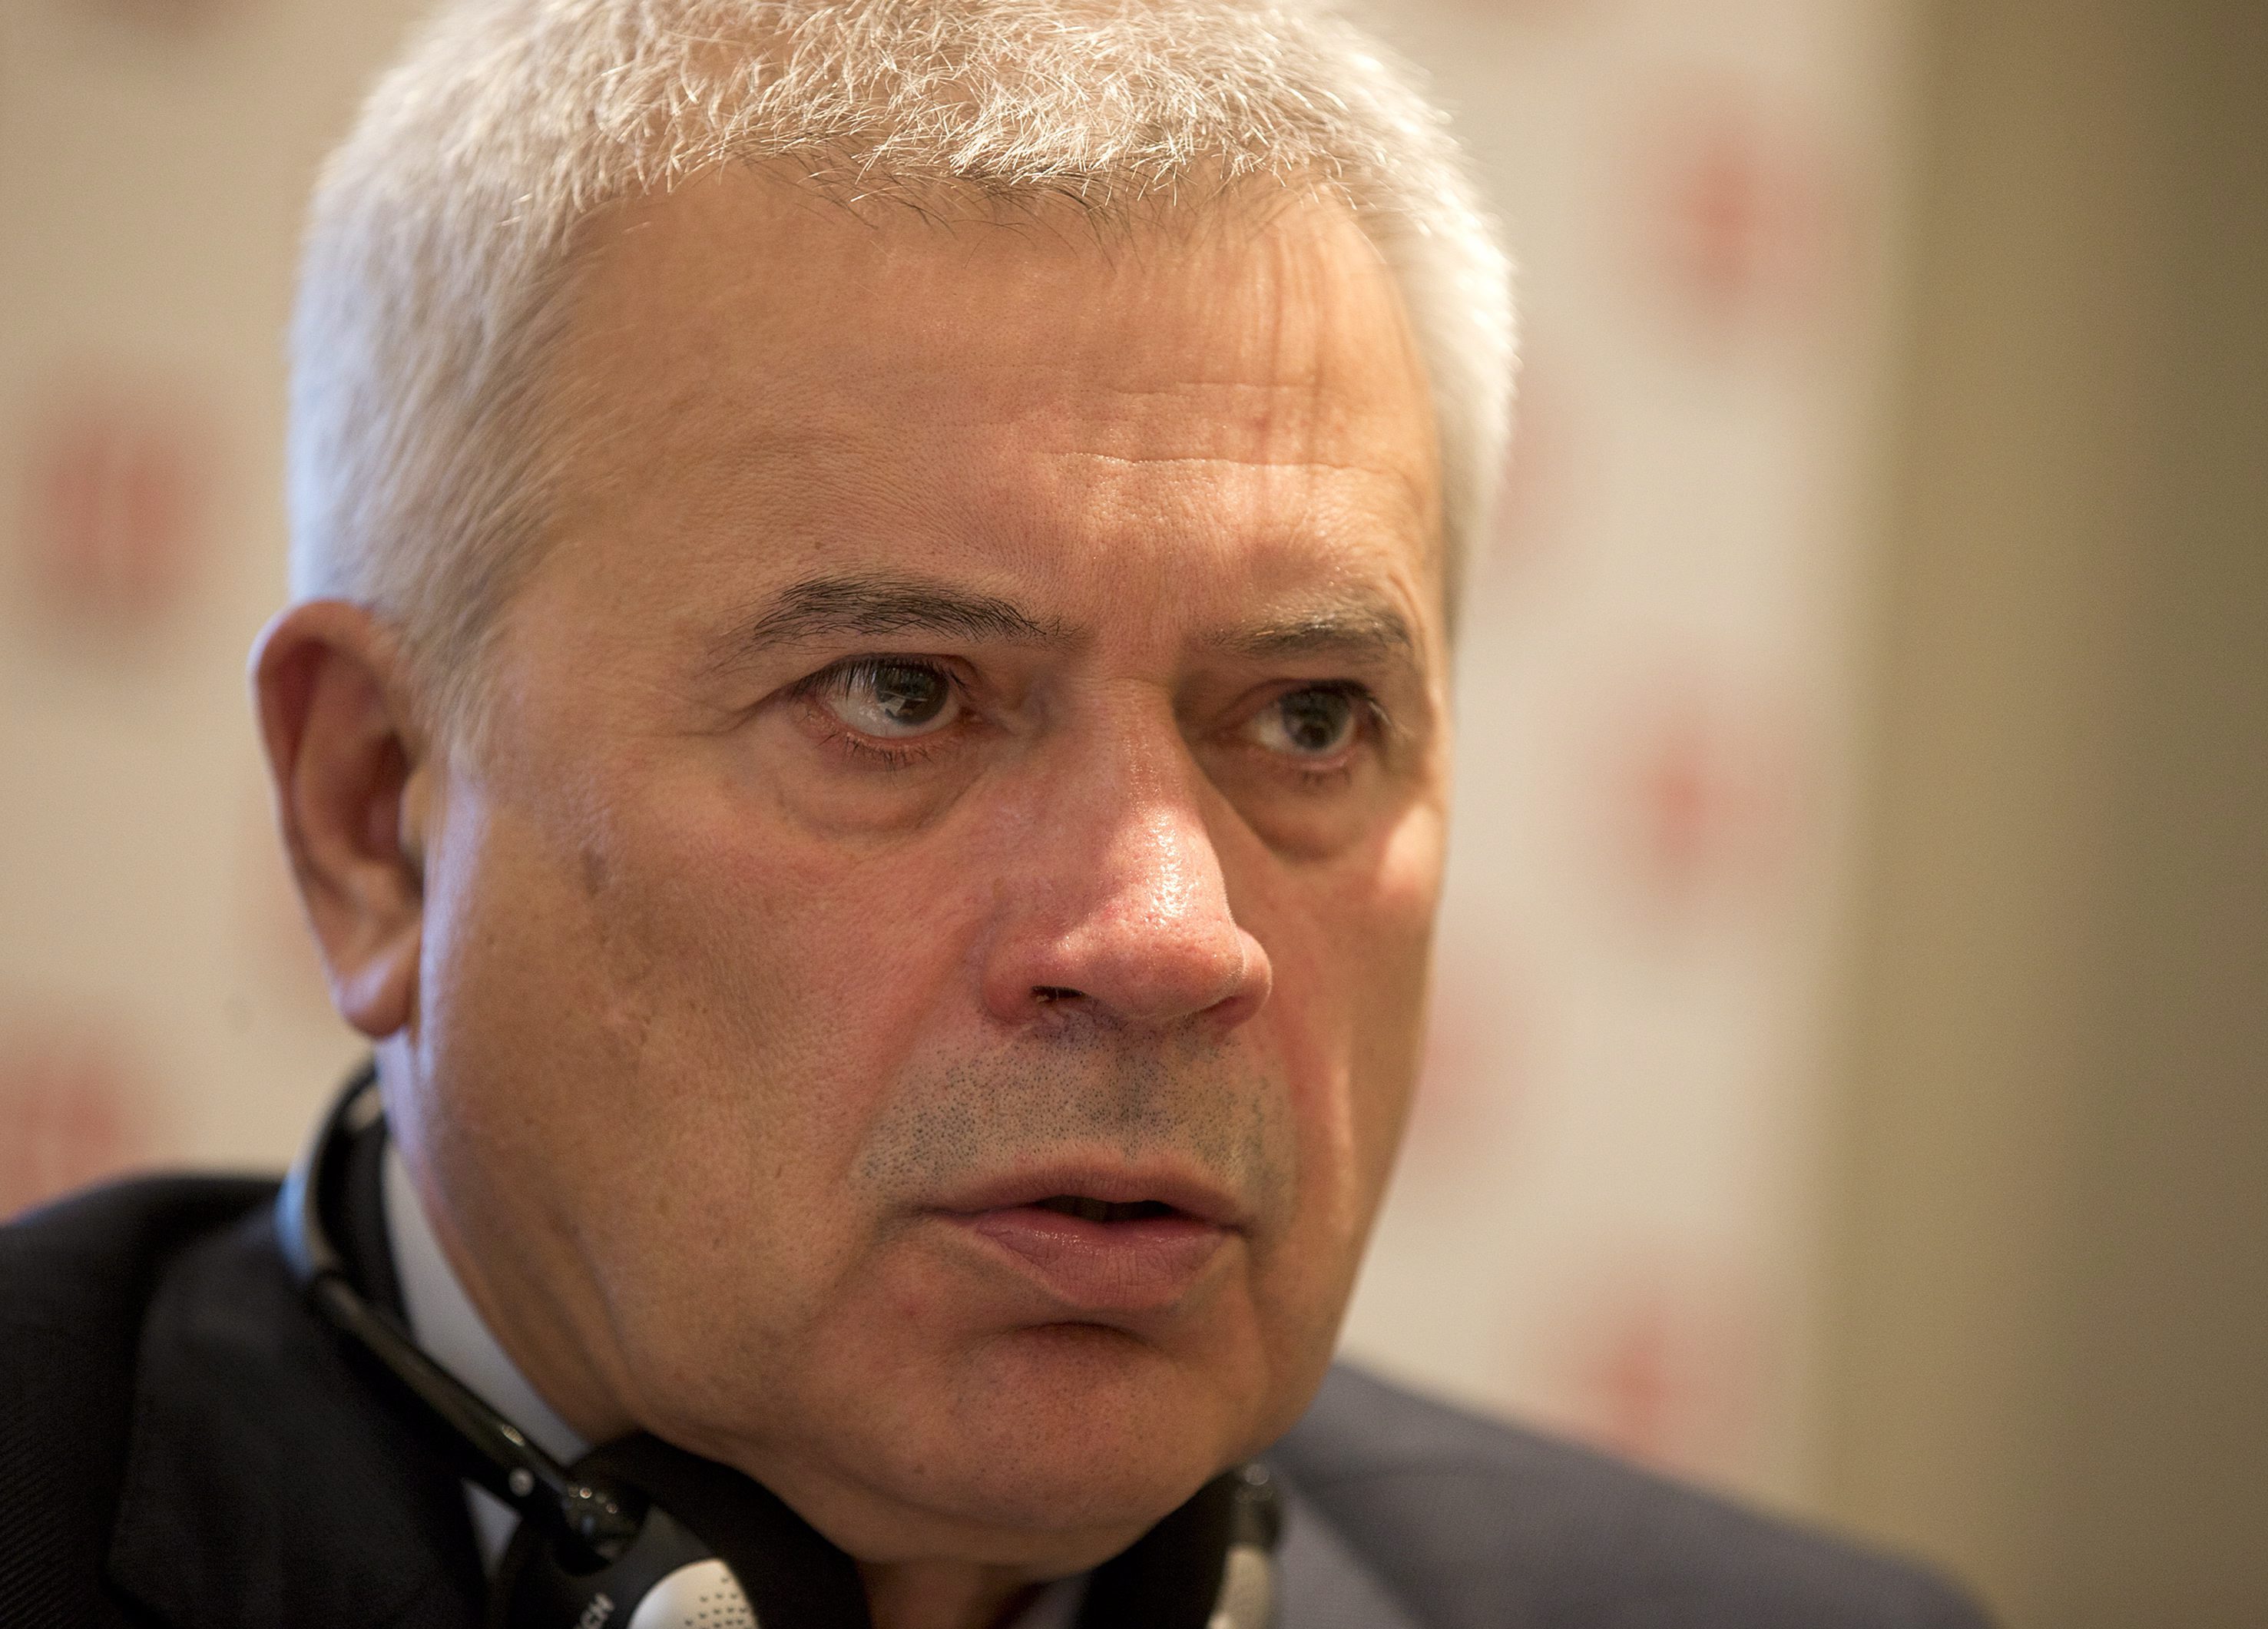 Vagit Alekperov ,CEO, of the Russian oil and gas company Lukoil speaking at a press conference in London in 2013. (Alastair Grant/AP)